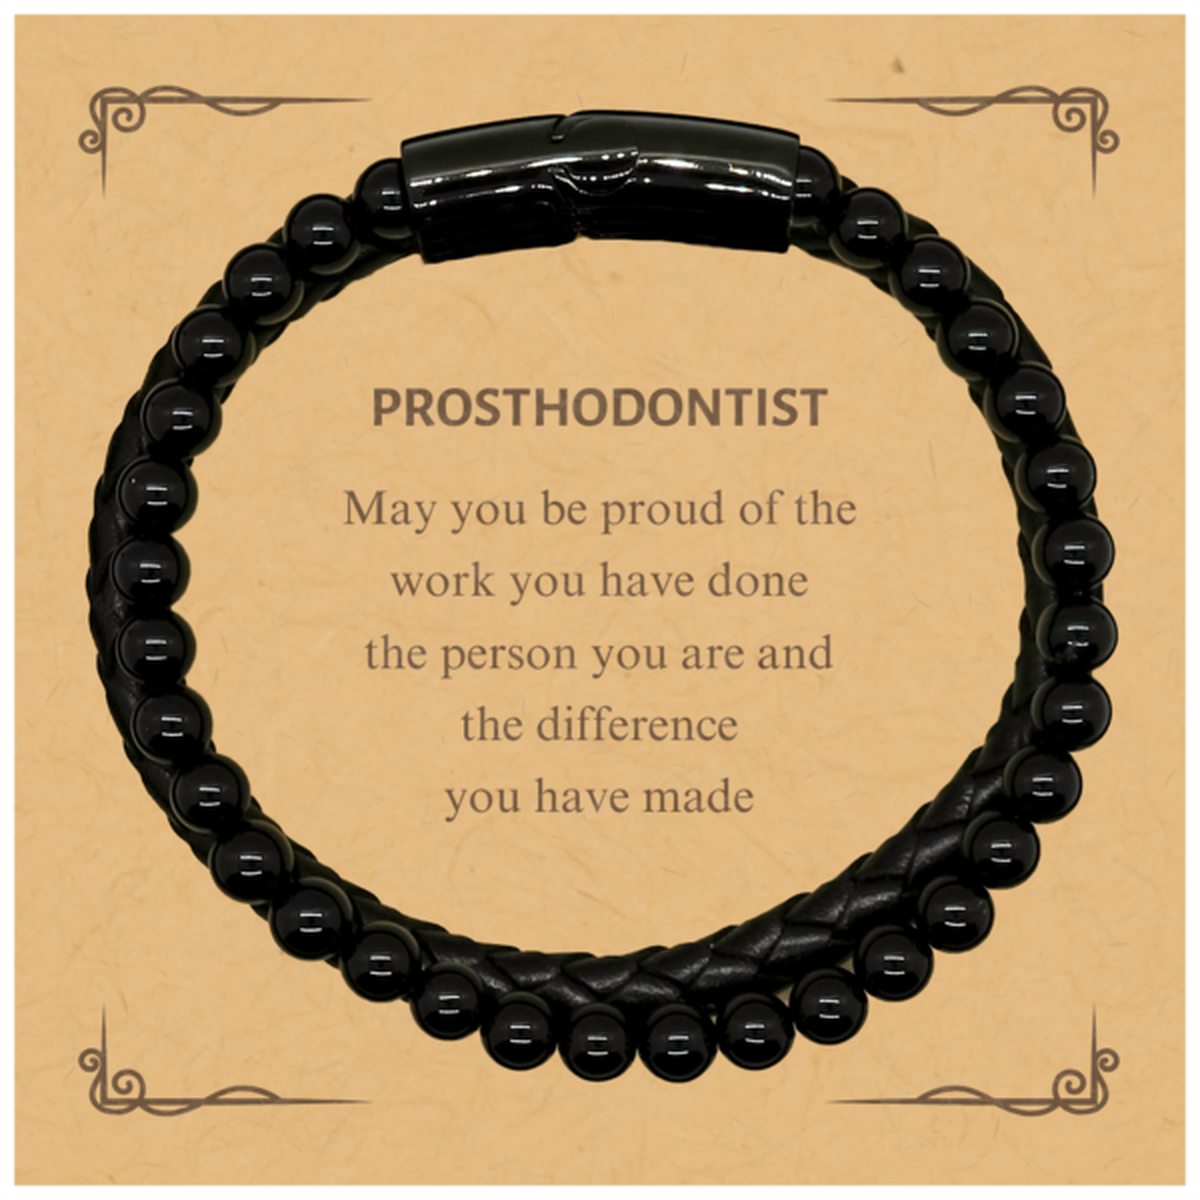 Prosthodontist May you be proud of the work you have done, Retirement Prosthodontist Stone Leather Bracelets for Colleague Appreciation Gifts Amazing for Prosthodontist